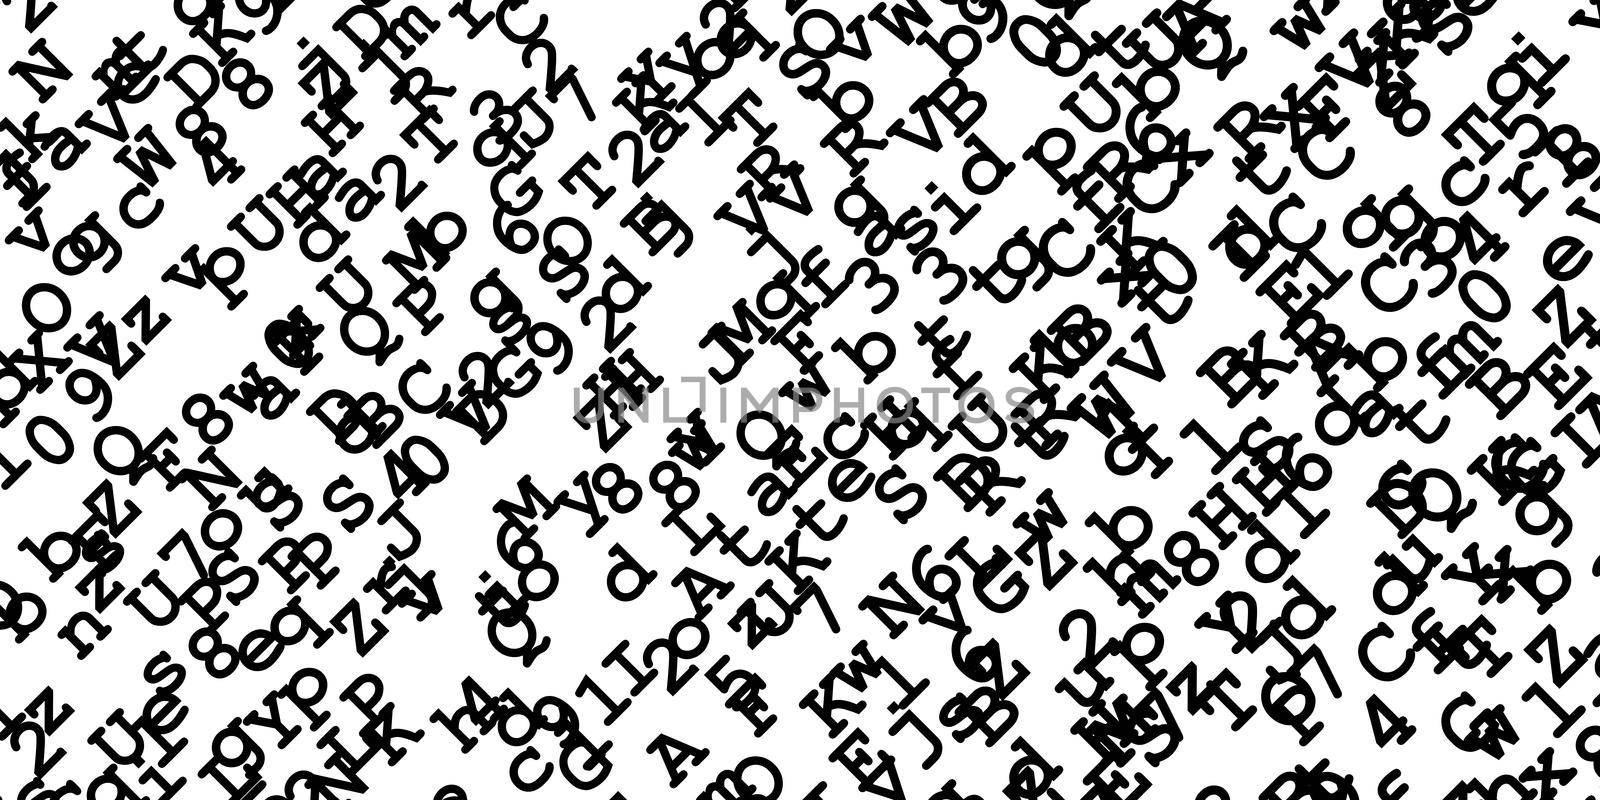 Random black digits and letters on white background by dutourdumonde